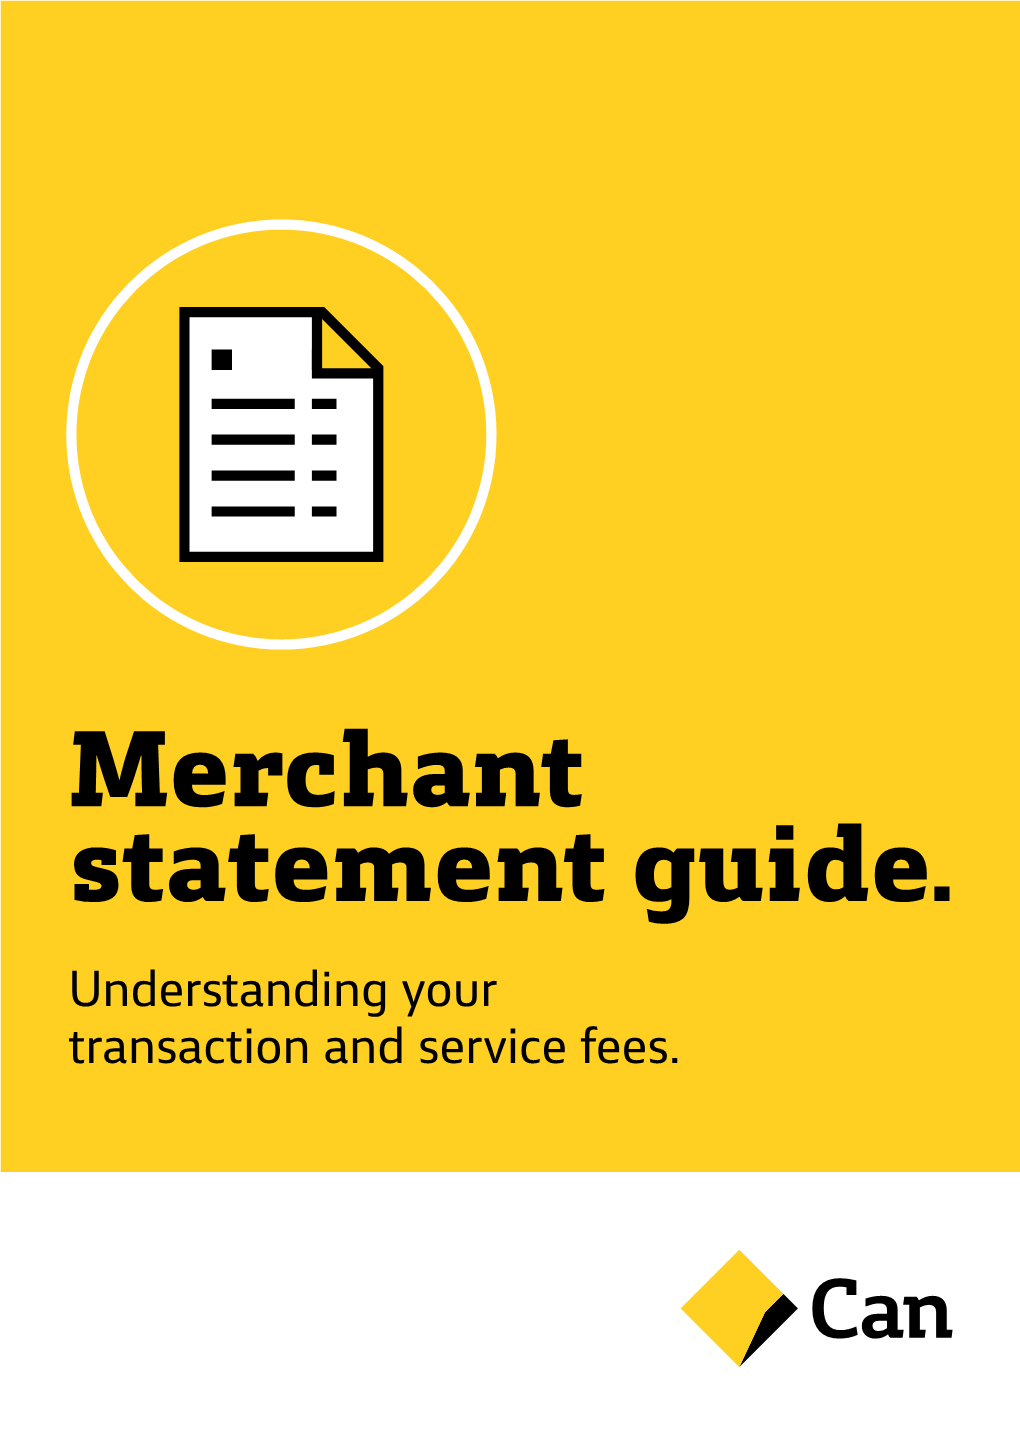 Merchant Statement Guide. Understanding Your Transaction and Service Fees